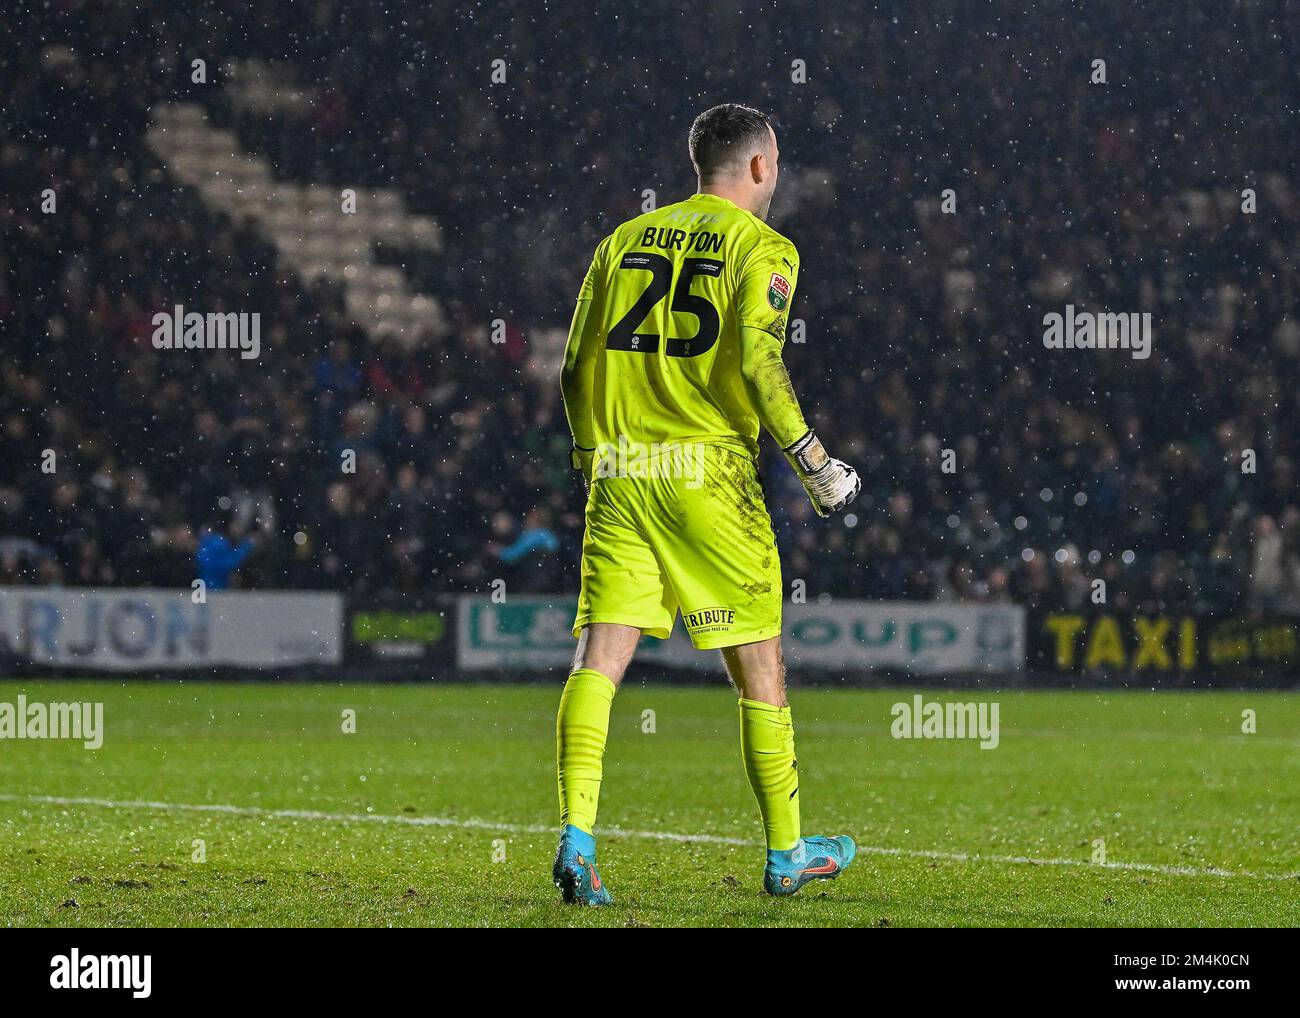 Plymouth Argyle goalkeeper Callum Burton (25) celebrates his save from the  penalty spot during the Papa John's Trophy match Plymouth Argyle vs AFC  Wimbledon at Home Park, Plymouth, United Kingdom, 21st December